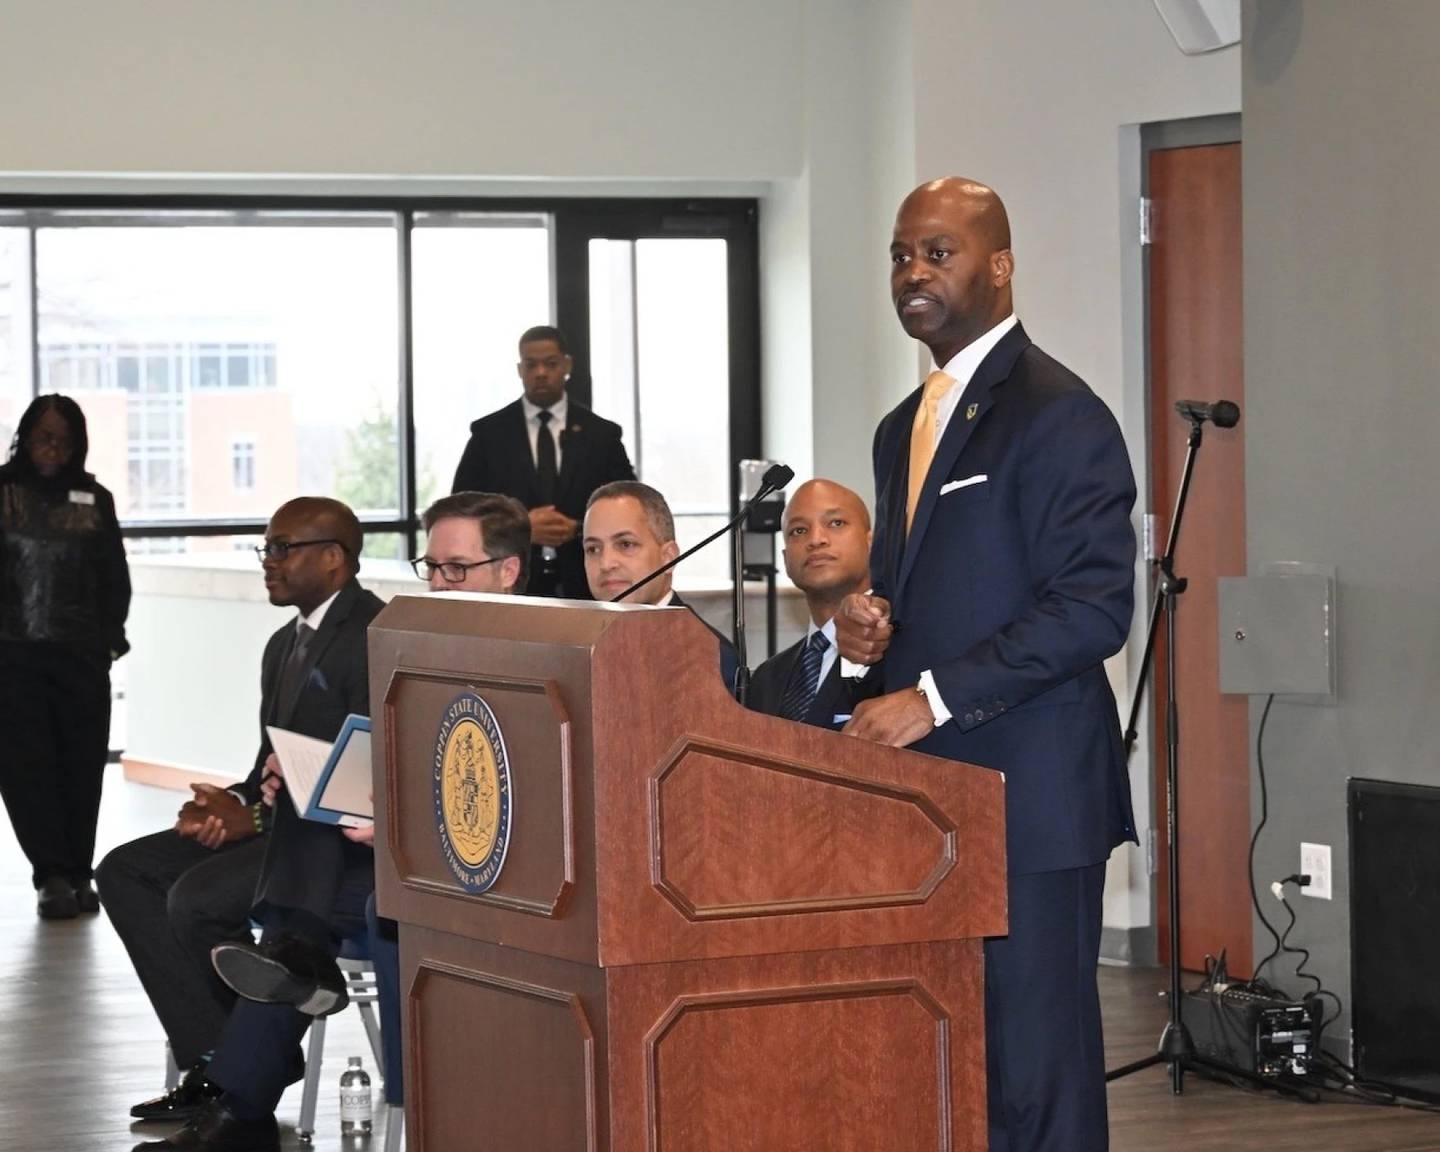 Coppin State University President Anthony L. Jenkins announces the $3.9 million grant from the U.S. Department of Commerce and National Telecommunications and Information Administration on Monday, January 30, 2023.